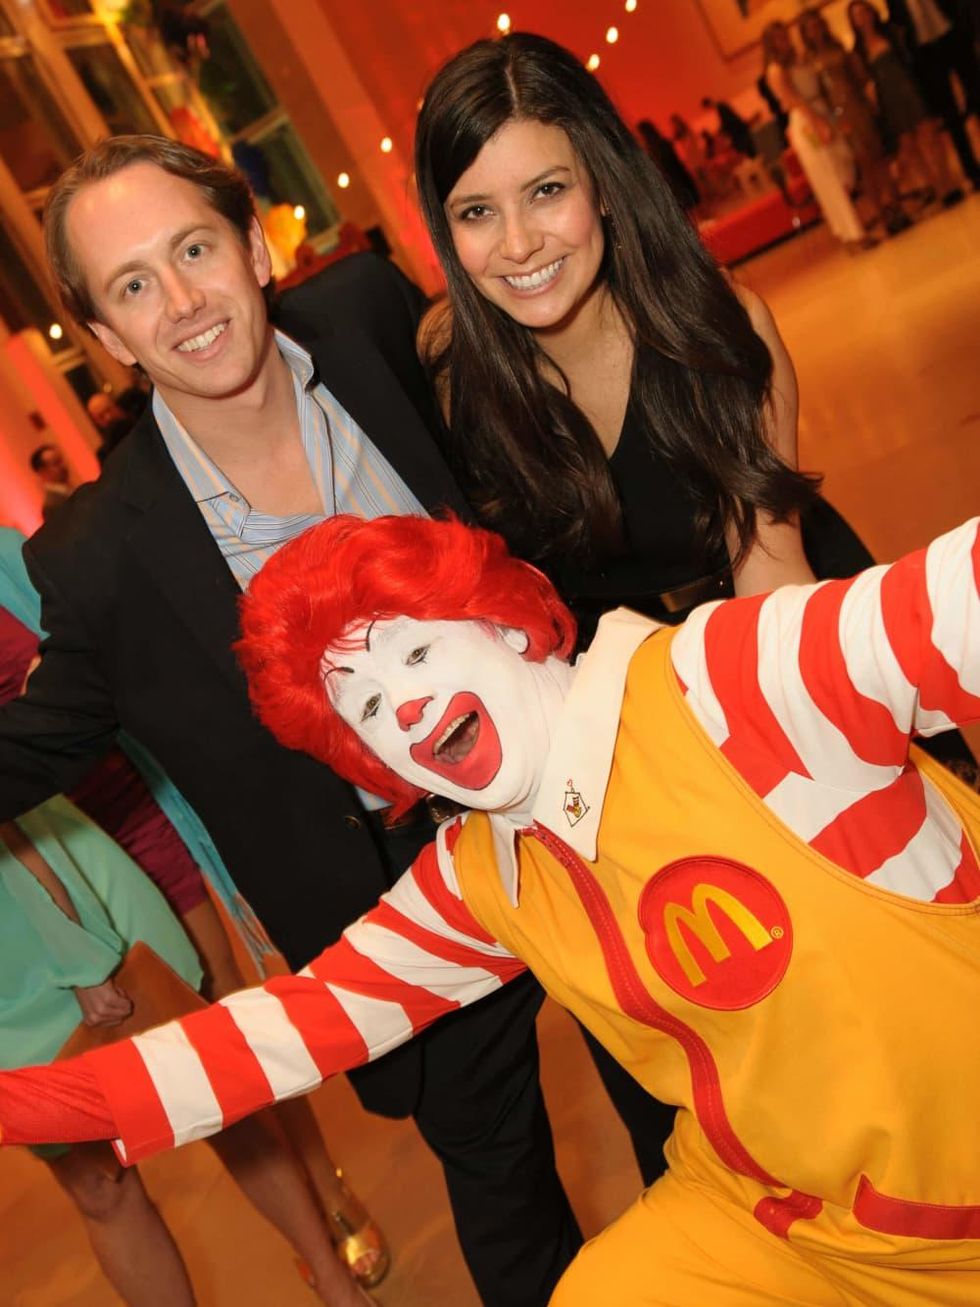 Ronald McDonald House of Young Friends